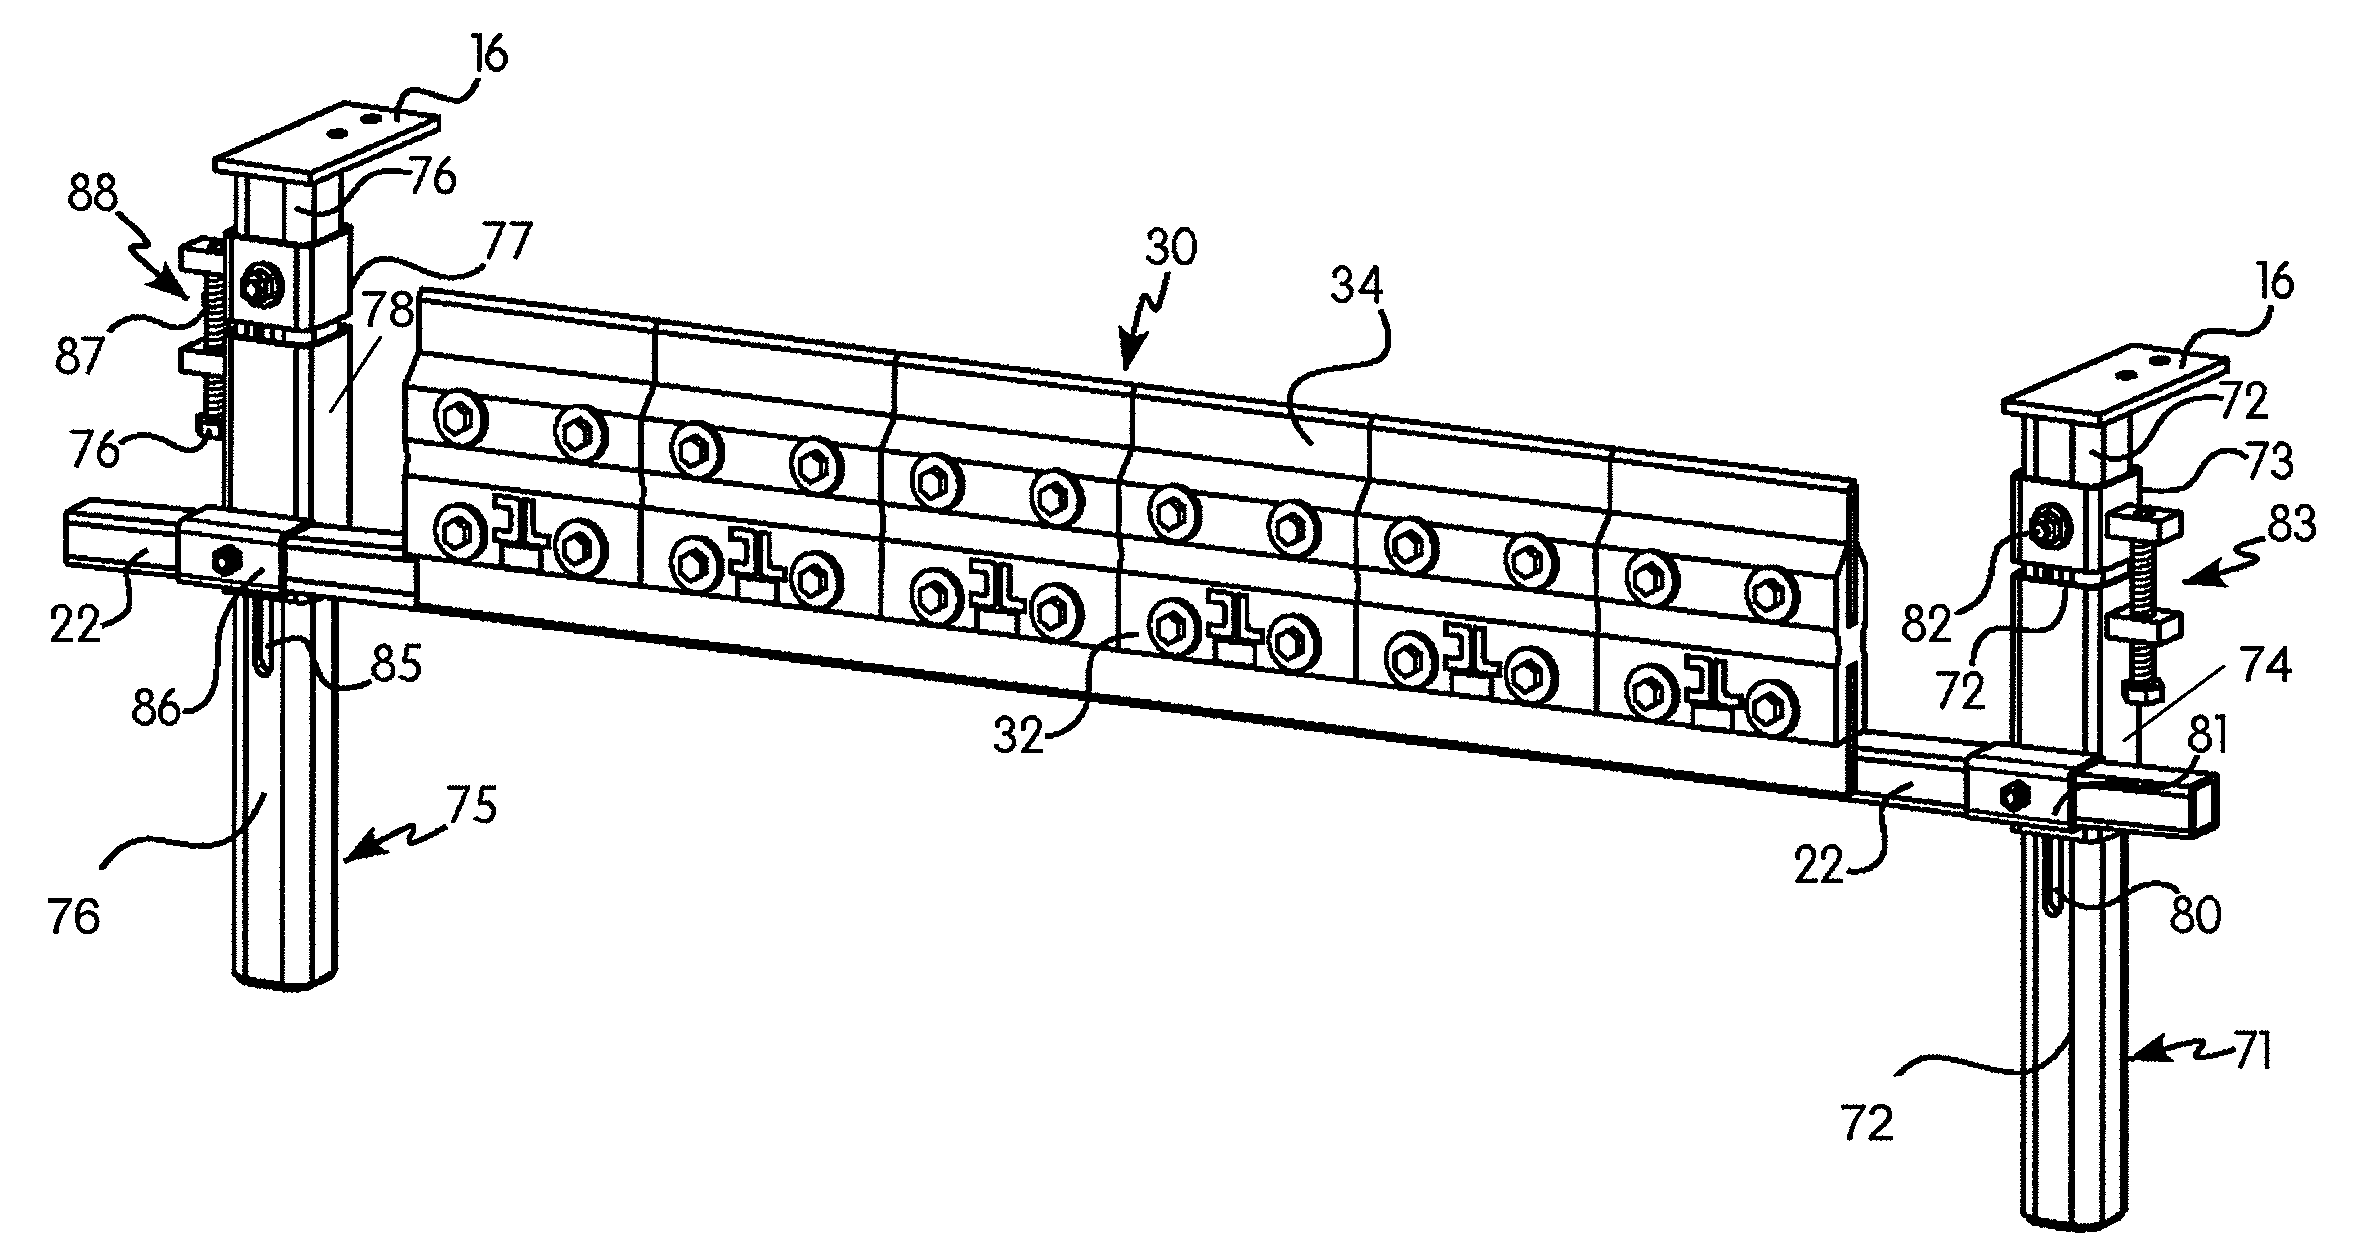 Secondary conveyor belt cleaner and mounting system therefor